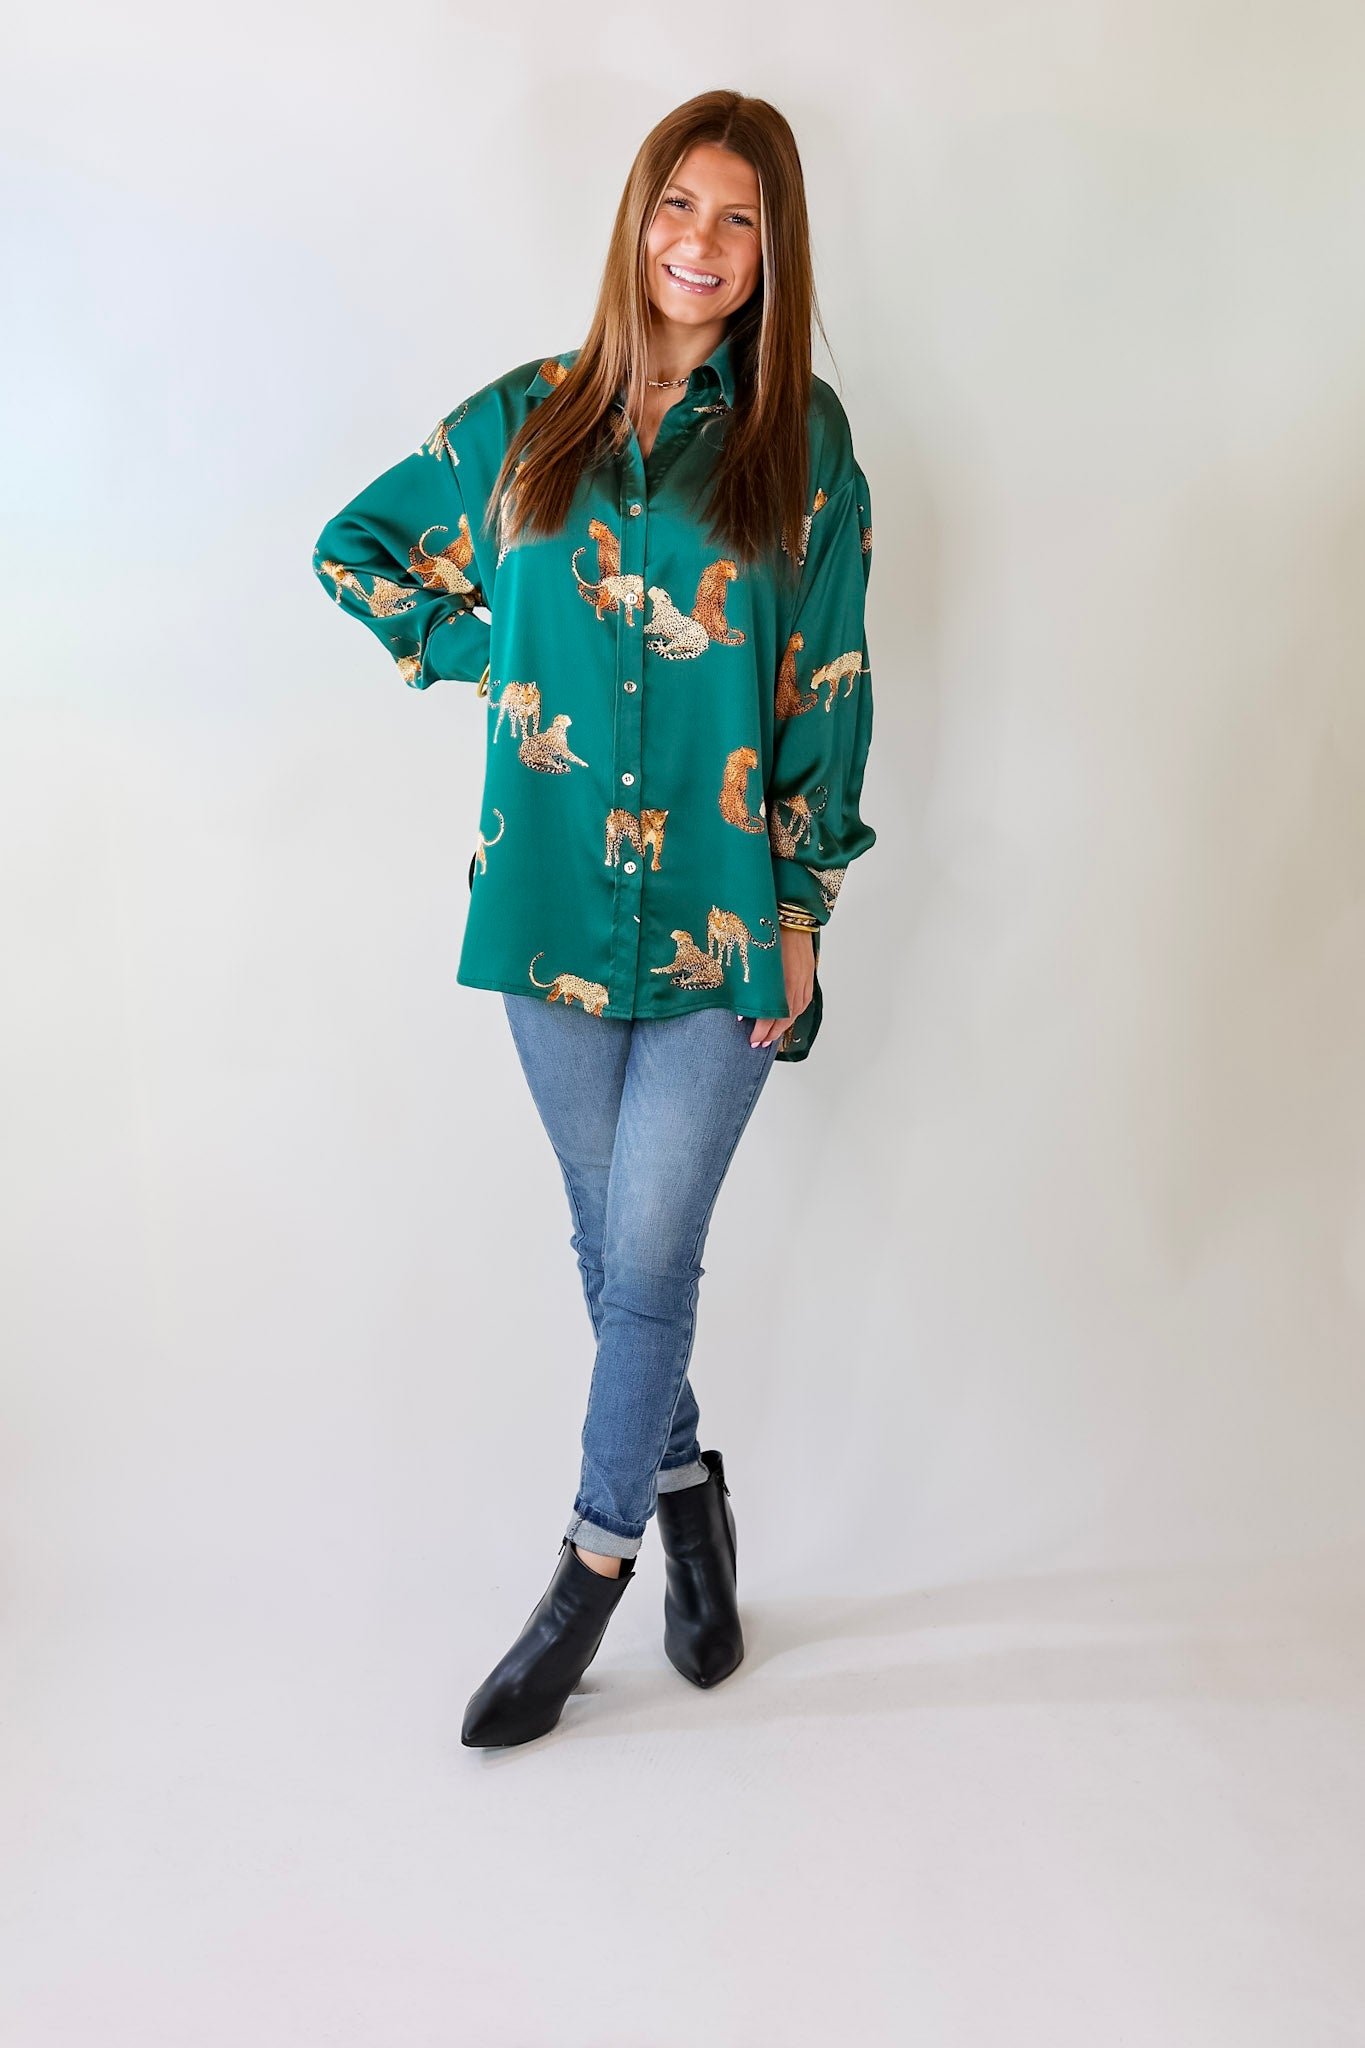 Tell Me Something Good Cheetah Print Long Sleeve Button Up Top in Hunter Green - Giddy Up Glamour Boutique